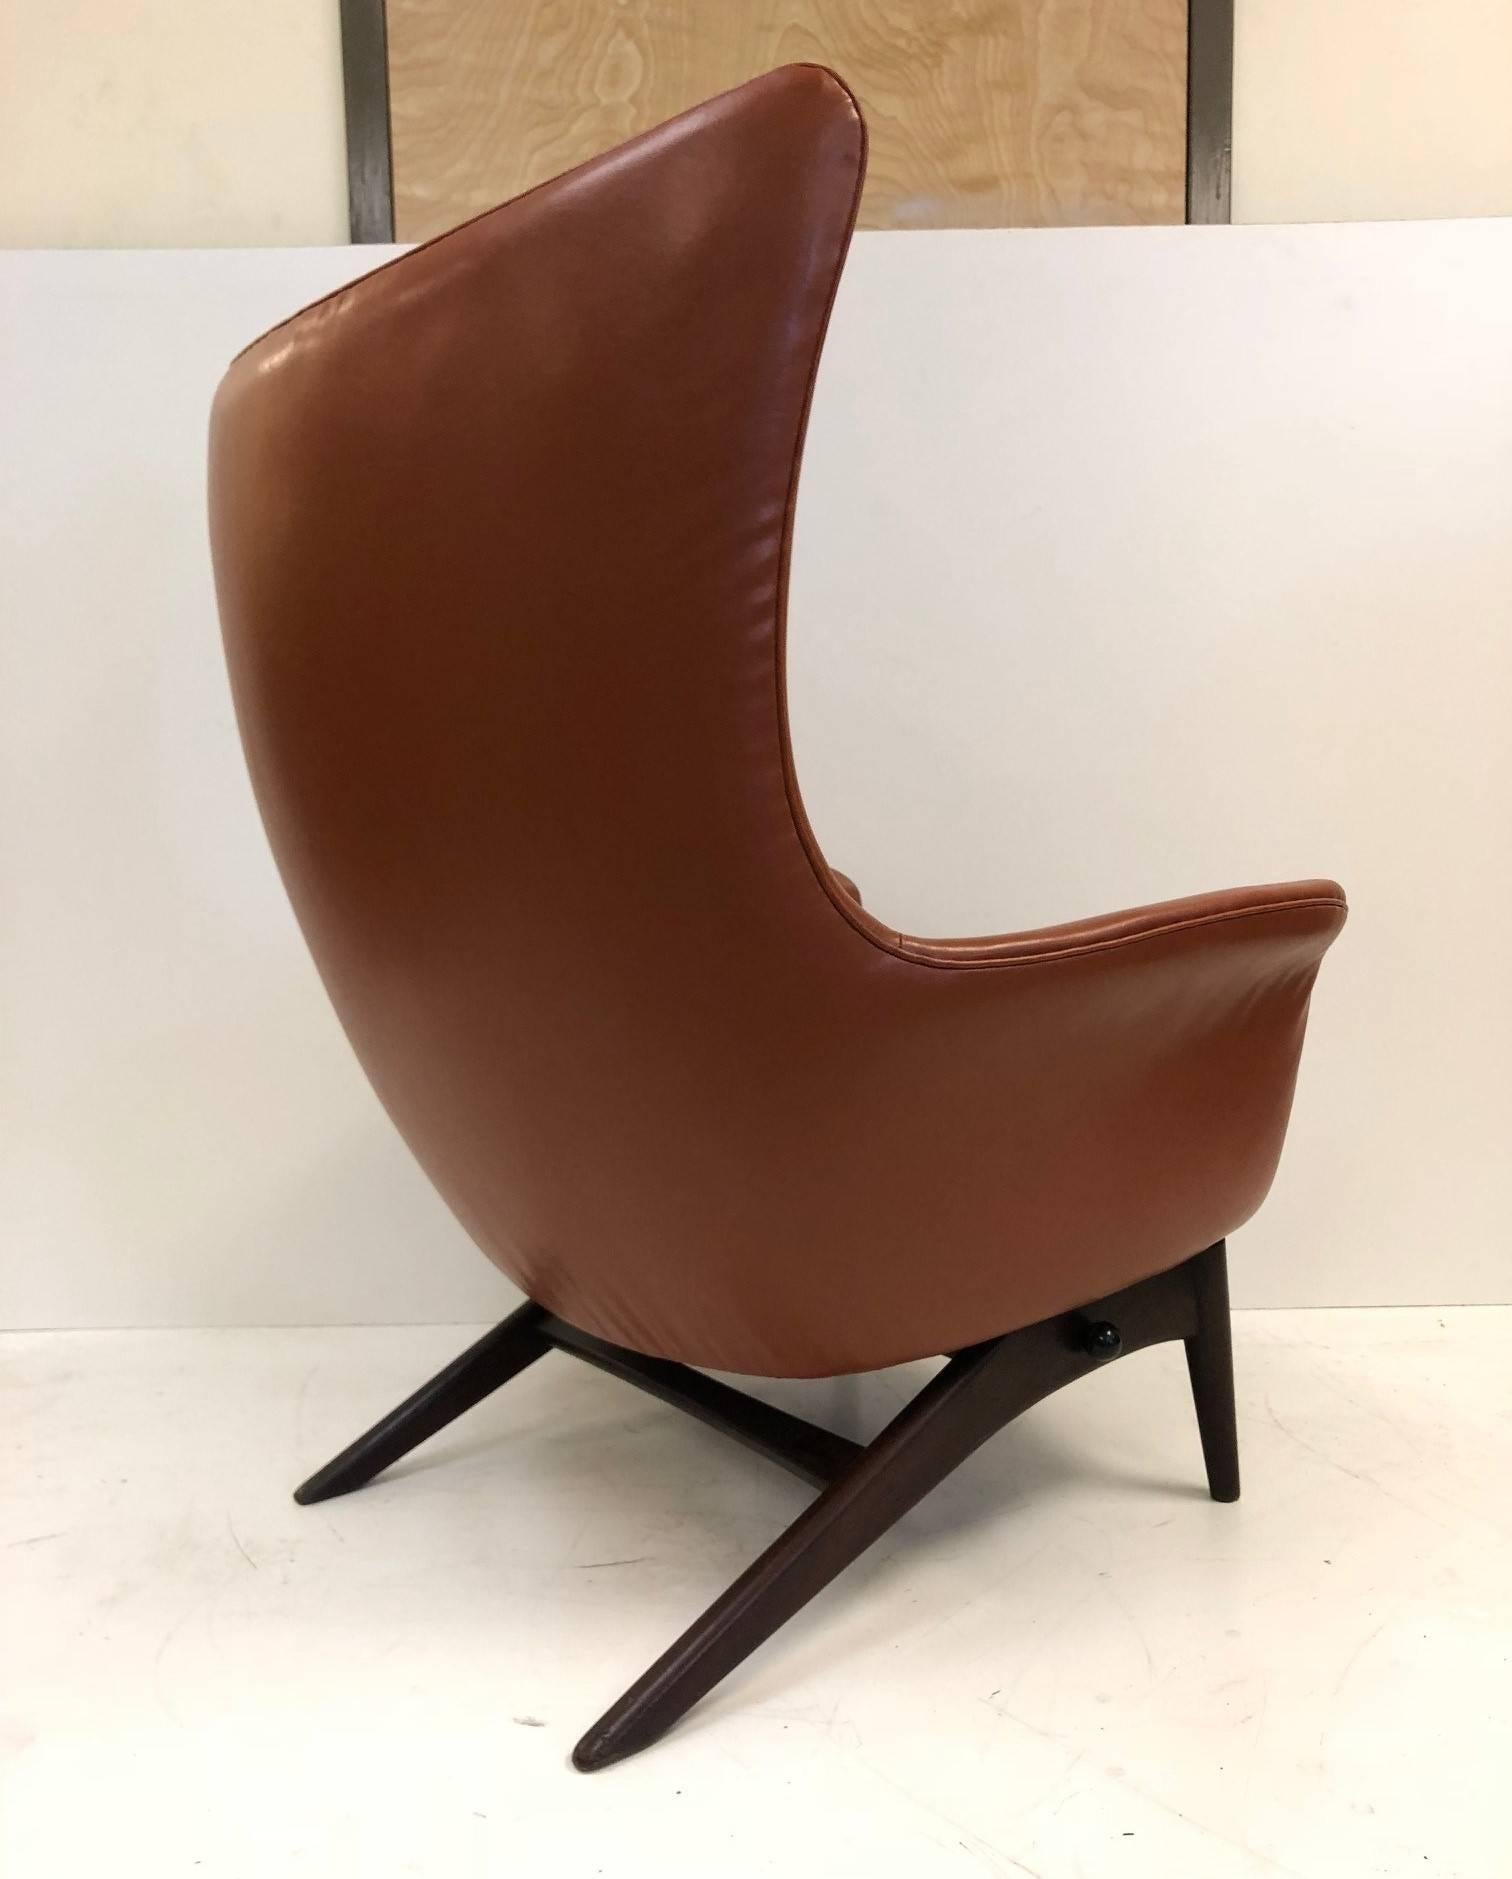 Reclining lounge chair by H.W. Klein. The chair has a teak frame, 1960s and has a tilt reclining mechanism.